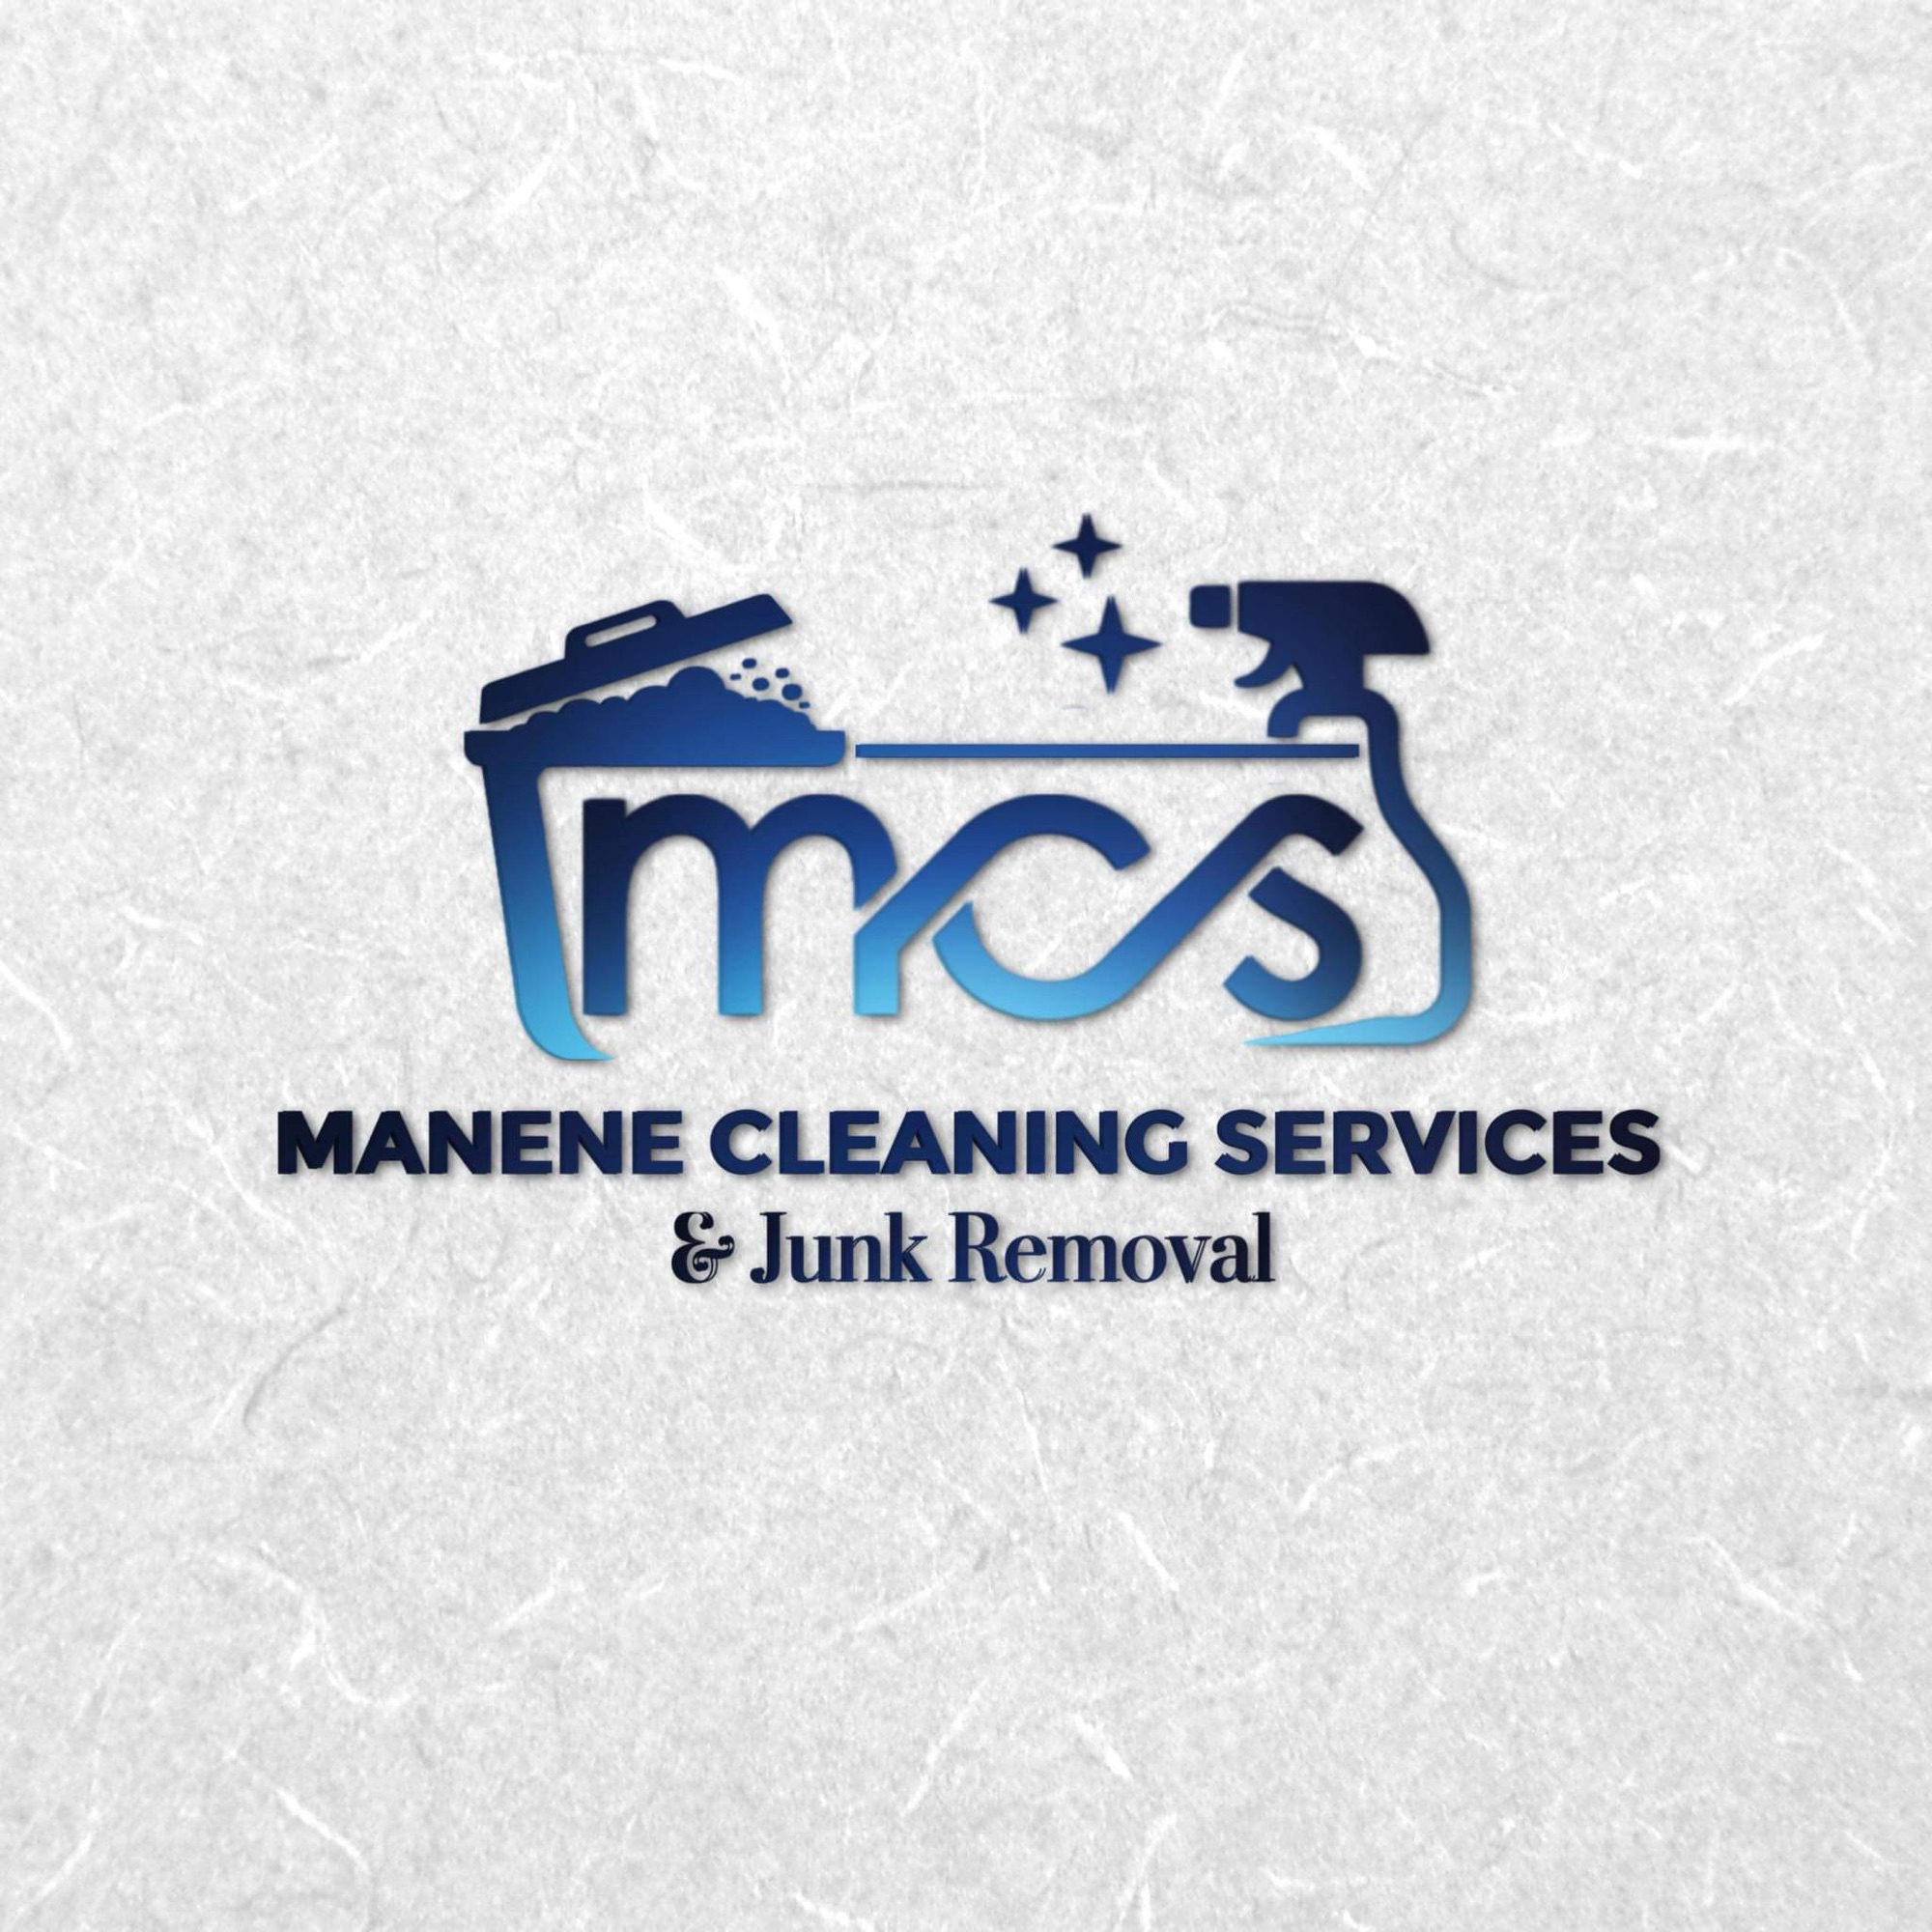 Manene Cleaning Services & Junk Removal Logo